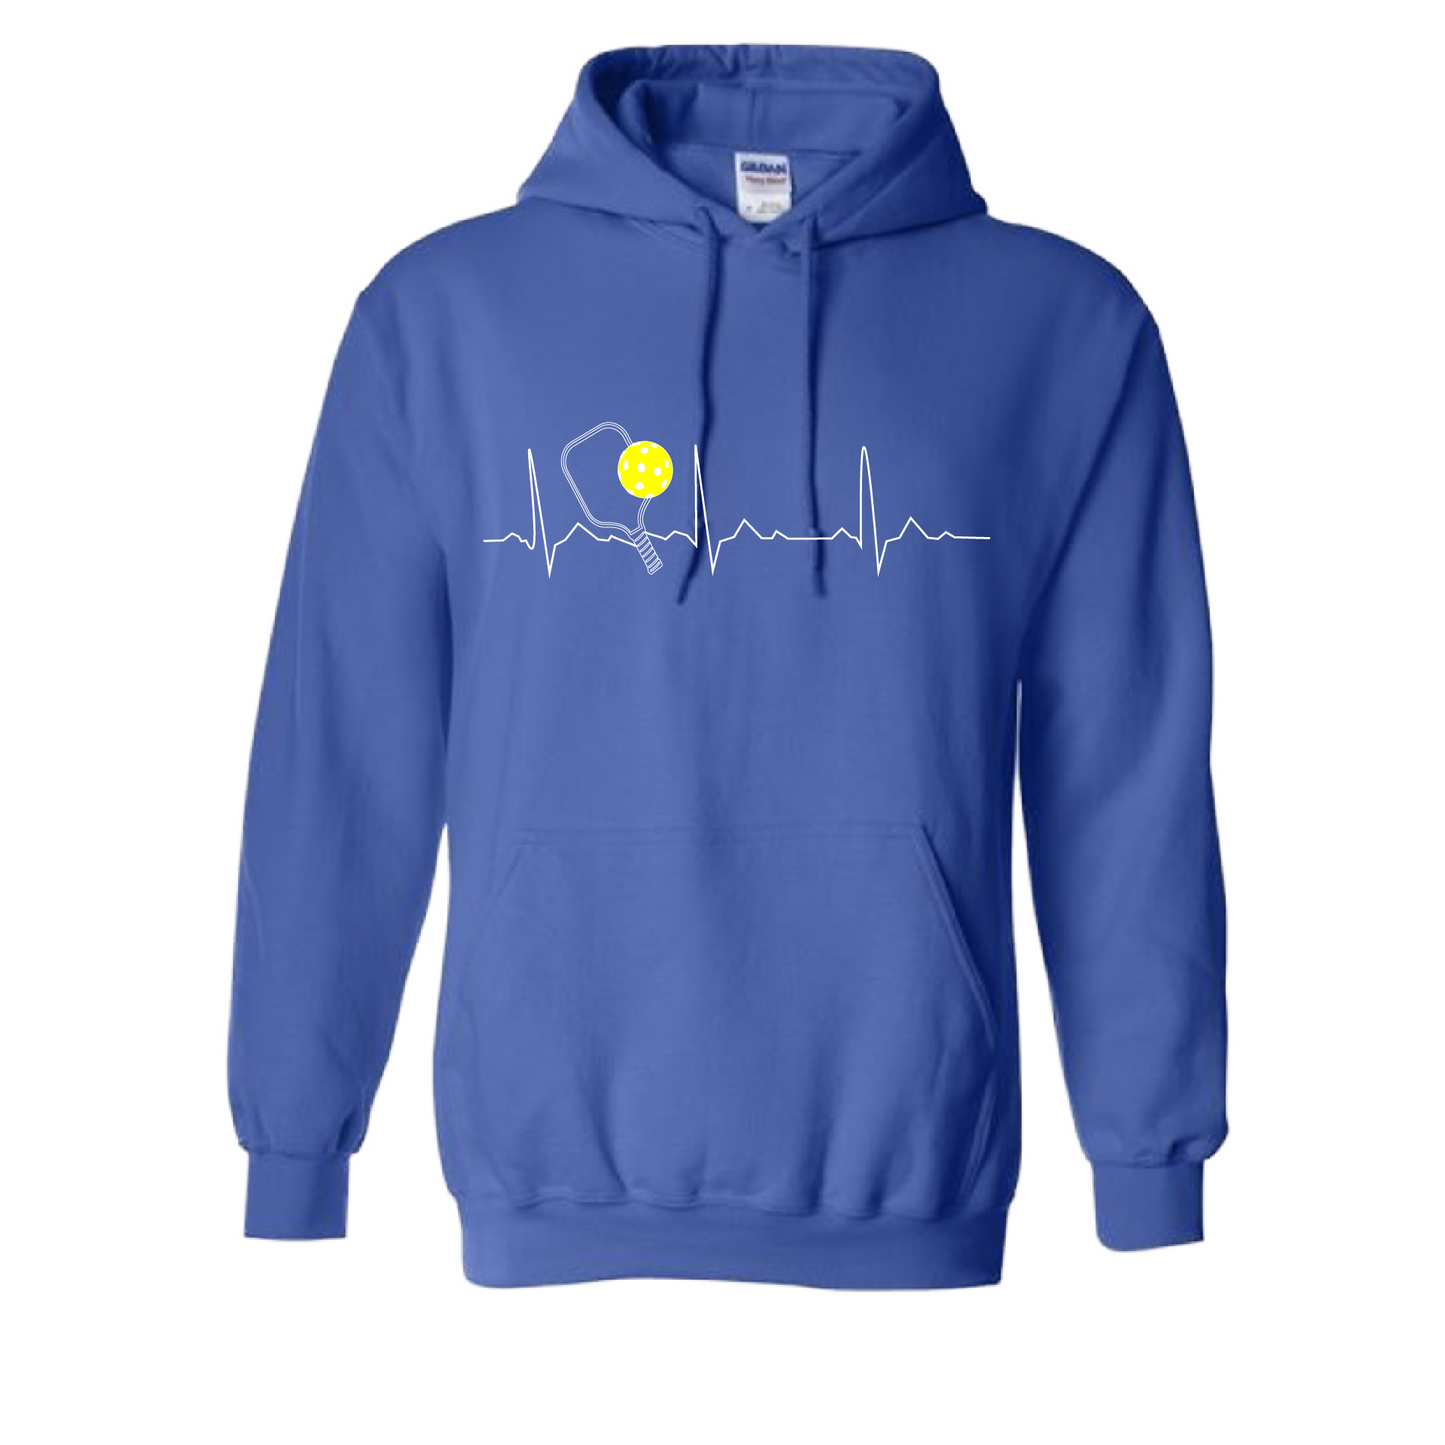 Pickleball Design: Heartbeat  Unisex Hooded Sweatshirt: Moisture-wicking, double-lined hood, front pouch pocket.  This unisex hooded sweatshirt is ultra comfortable and soft. Stay warm on the Pickleball courts while being that hit with this one of kind design.